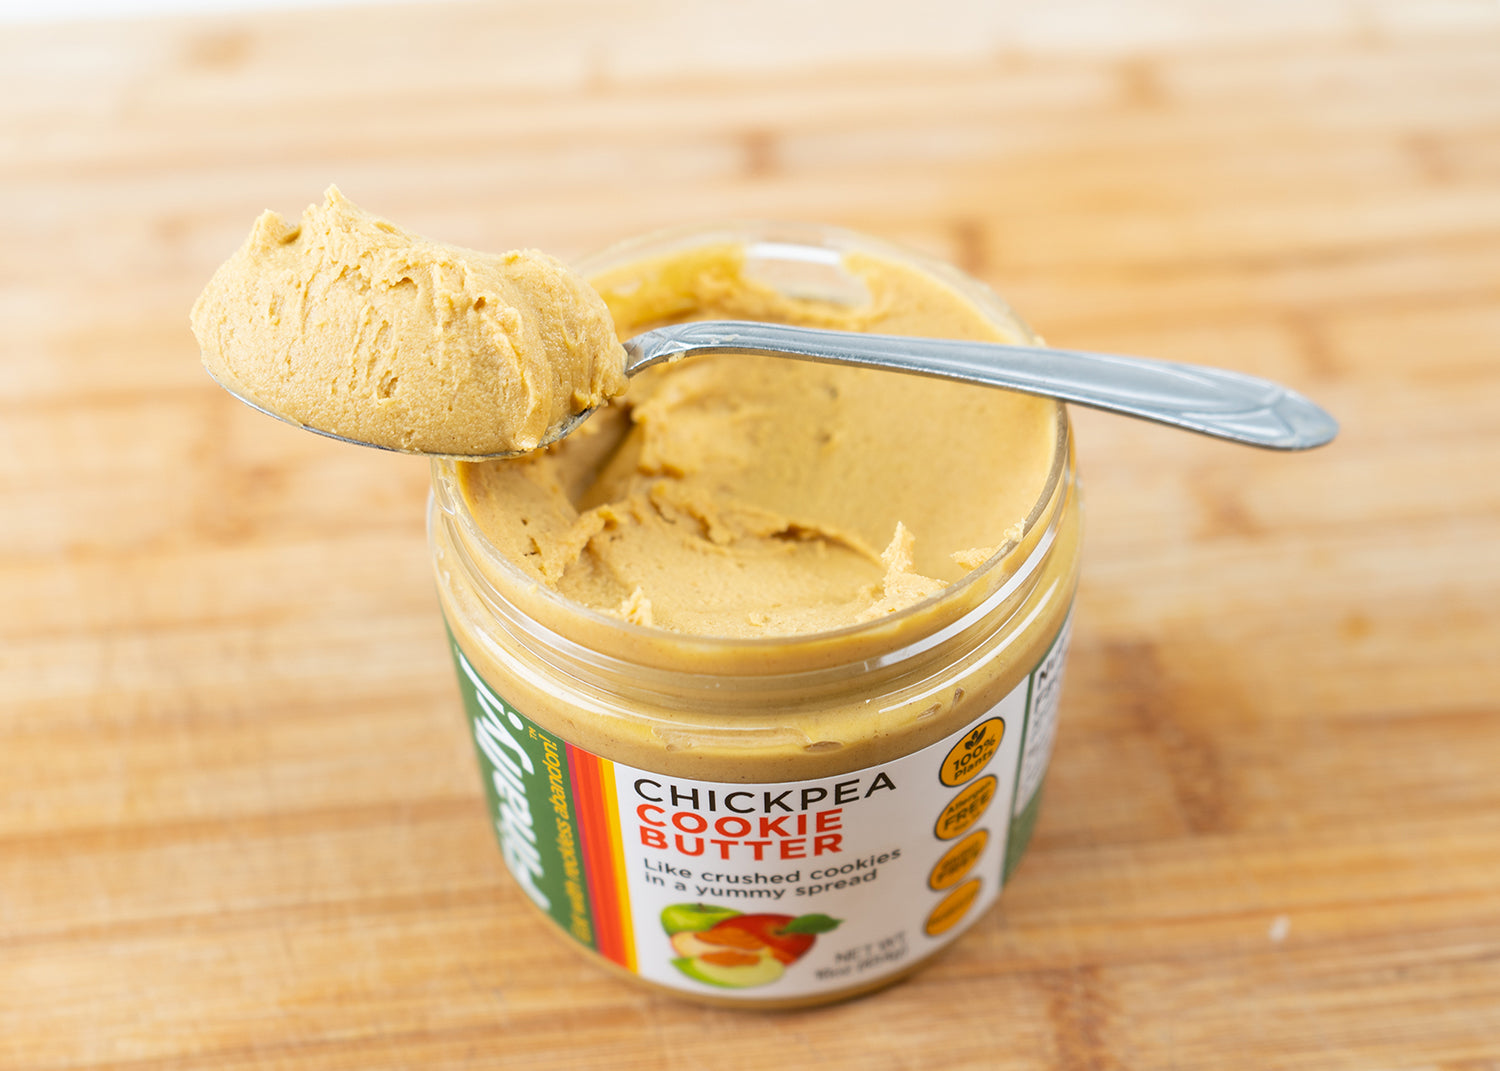 Chickpea Cookie Butter